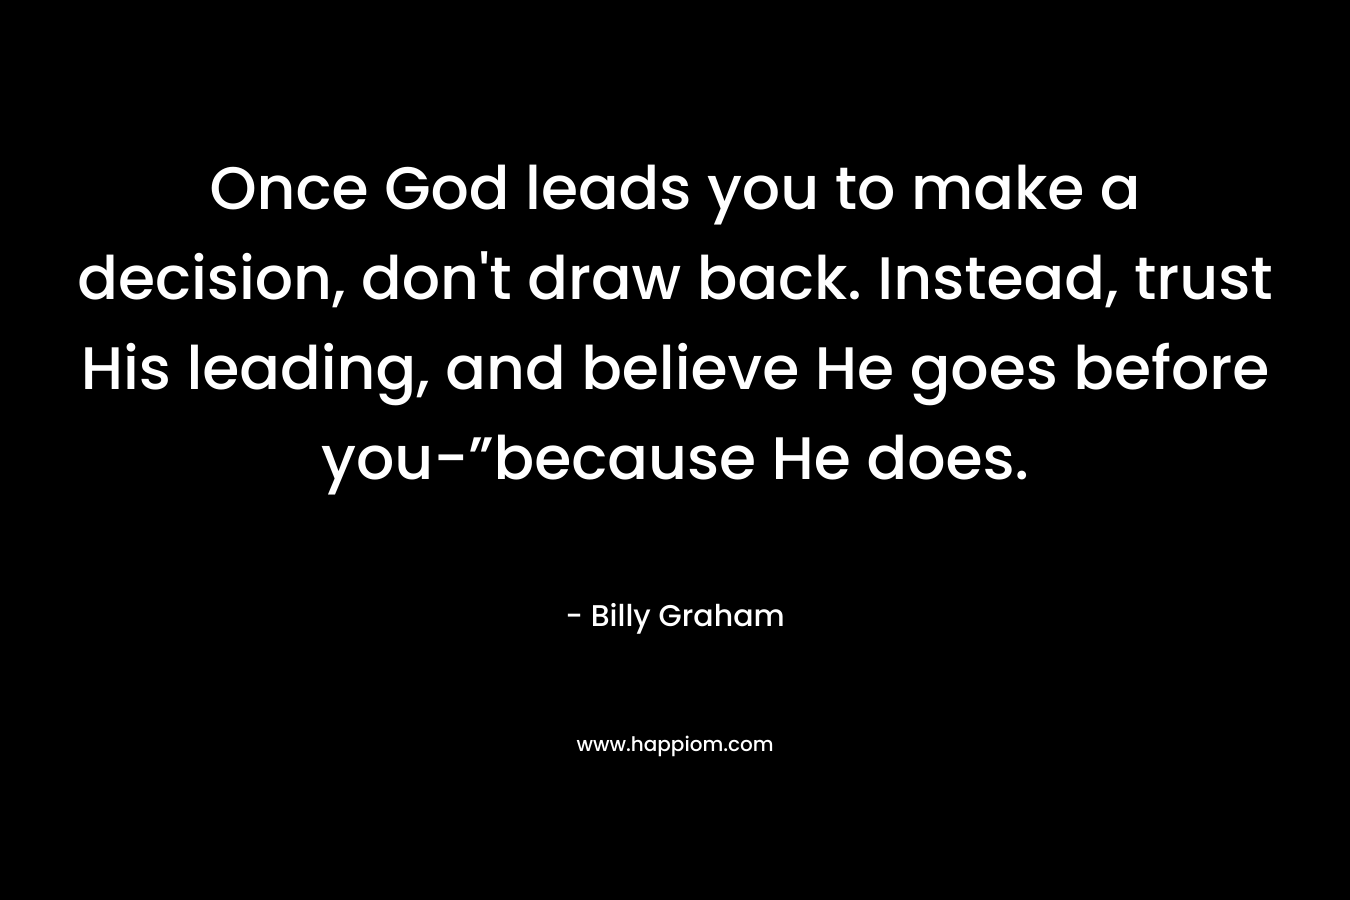 Once God leads you to make a decision, don't draw back. Instead, trust His leading, and believe He goes before you-”because He does.